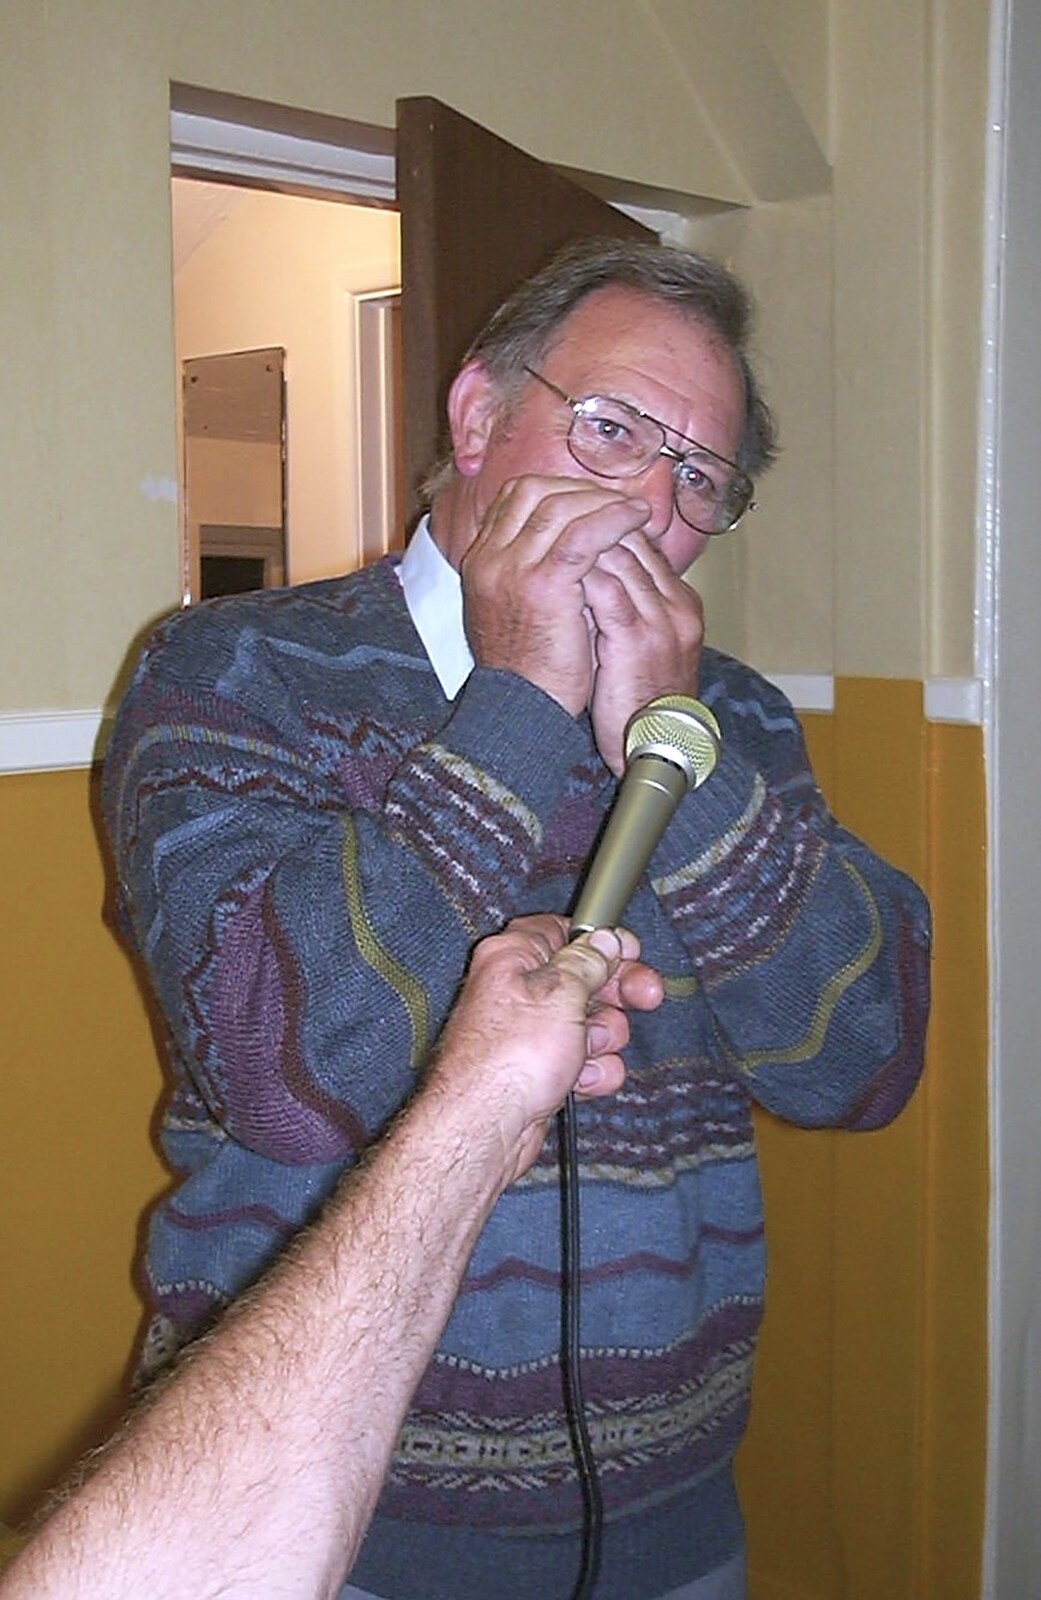 Cyril Hammond plays some harmonica from Golden Jubilee Celebrations, The Village Hall, Brome, Suffolk - 4th June 2002